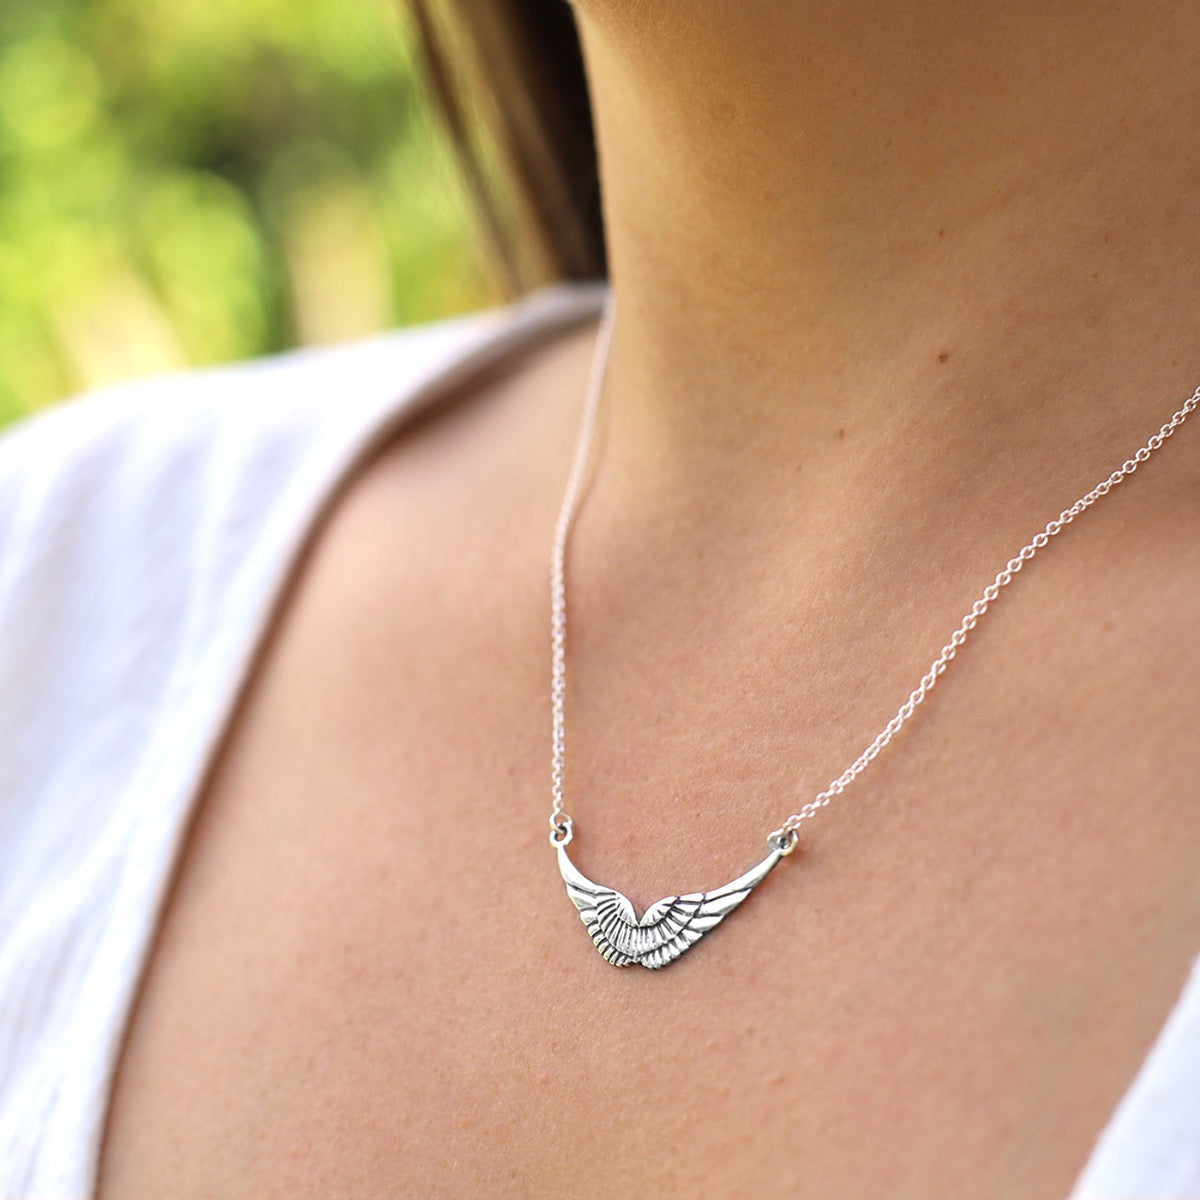 Elevated Heart Necklace, Sterling silver